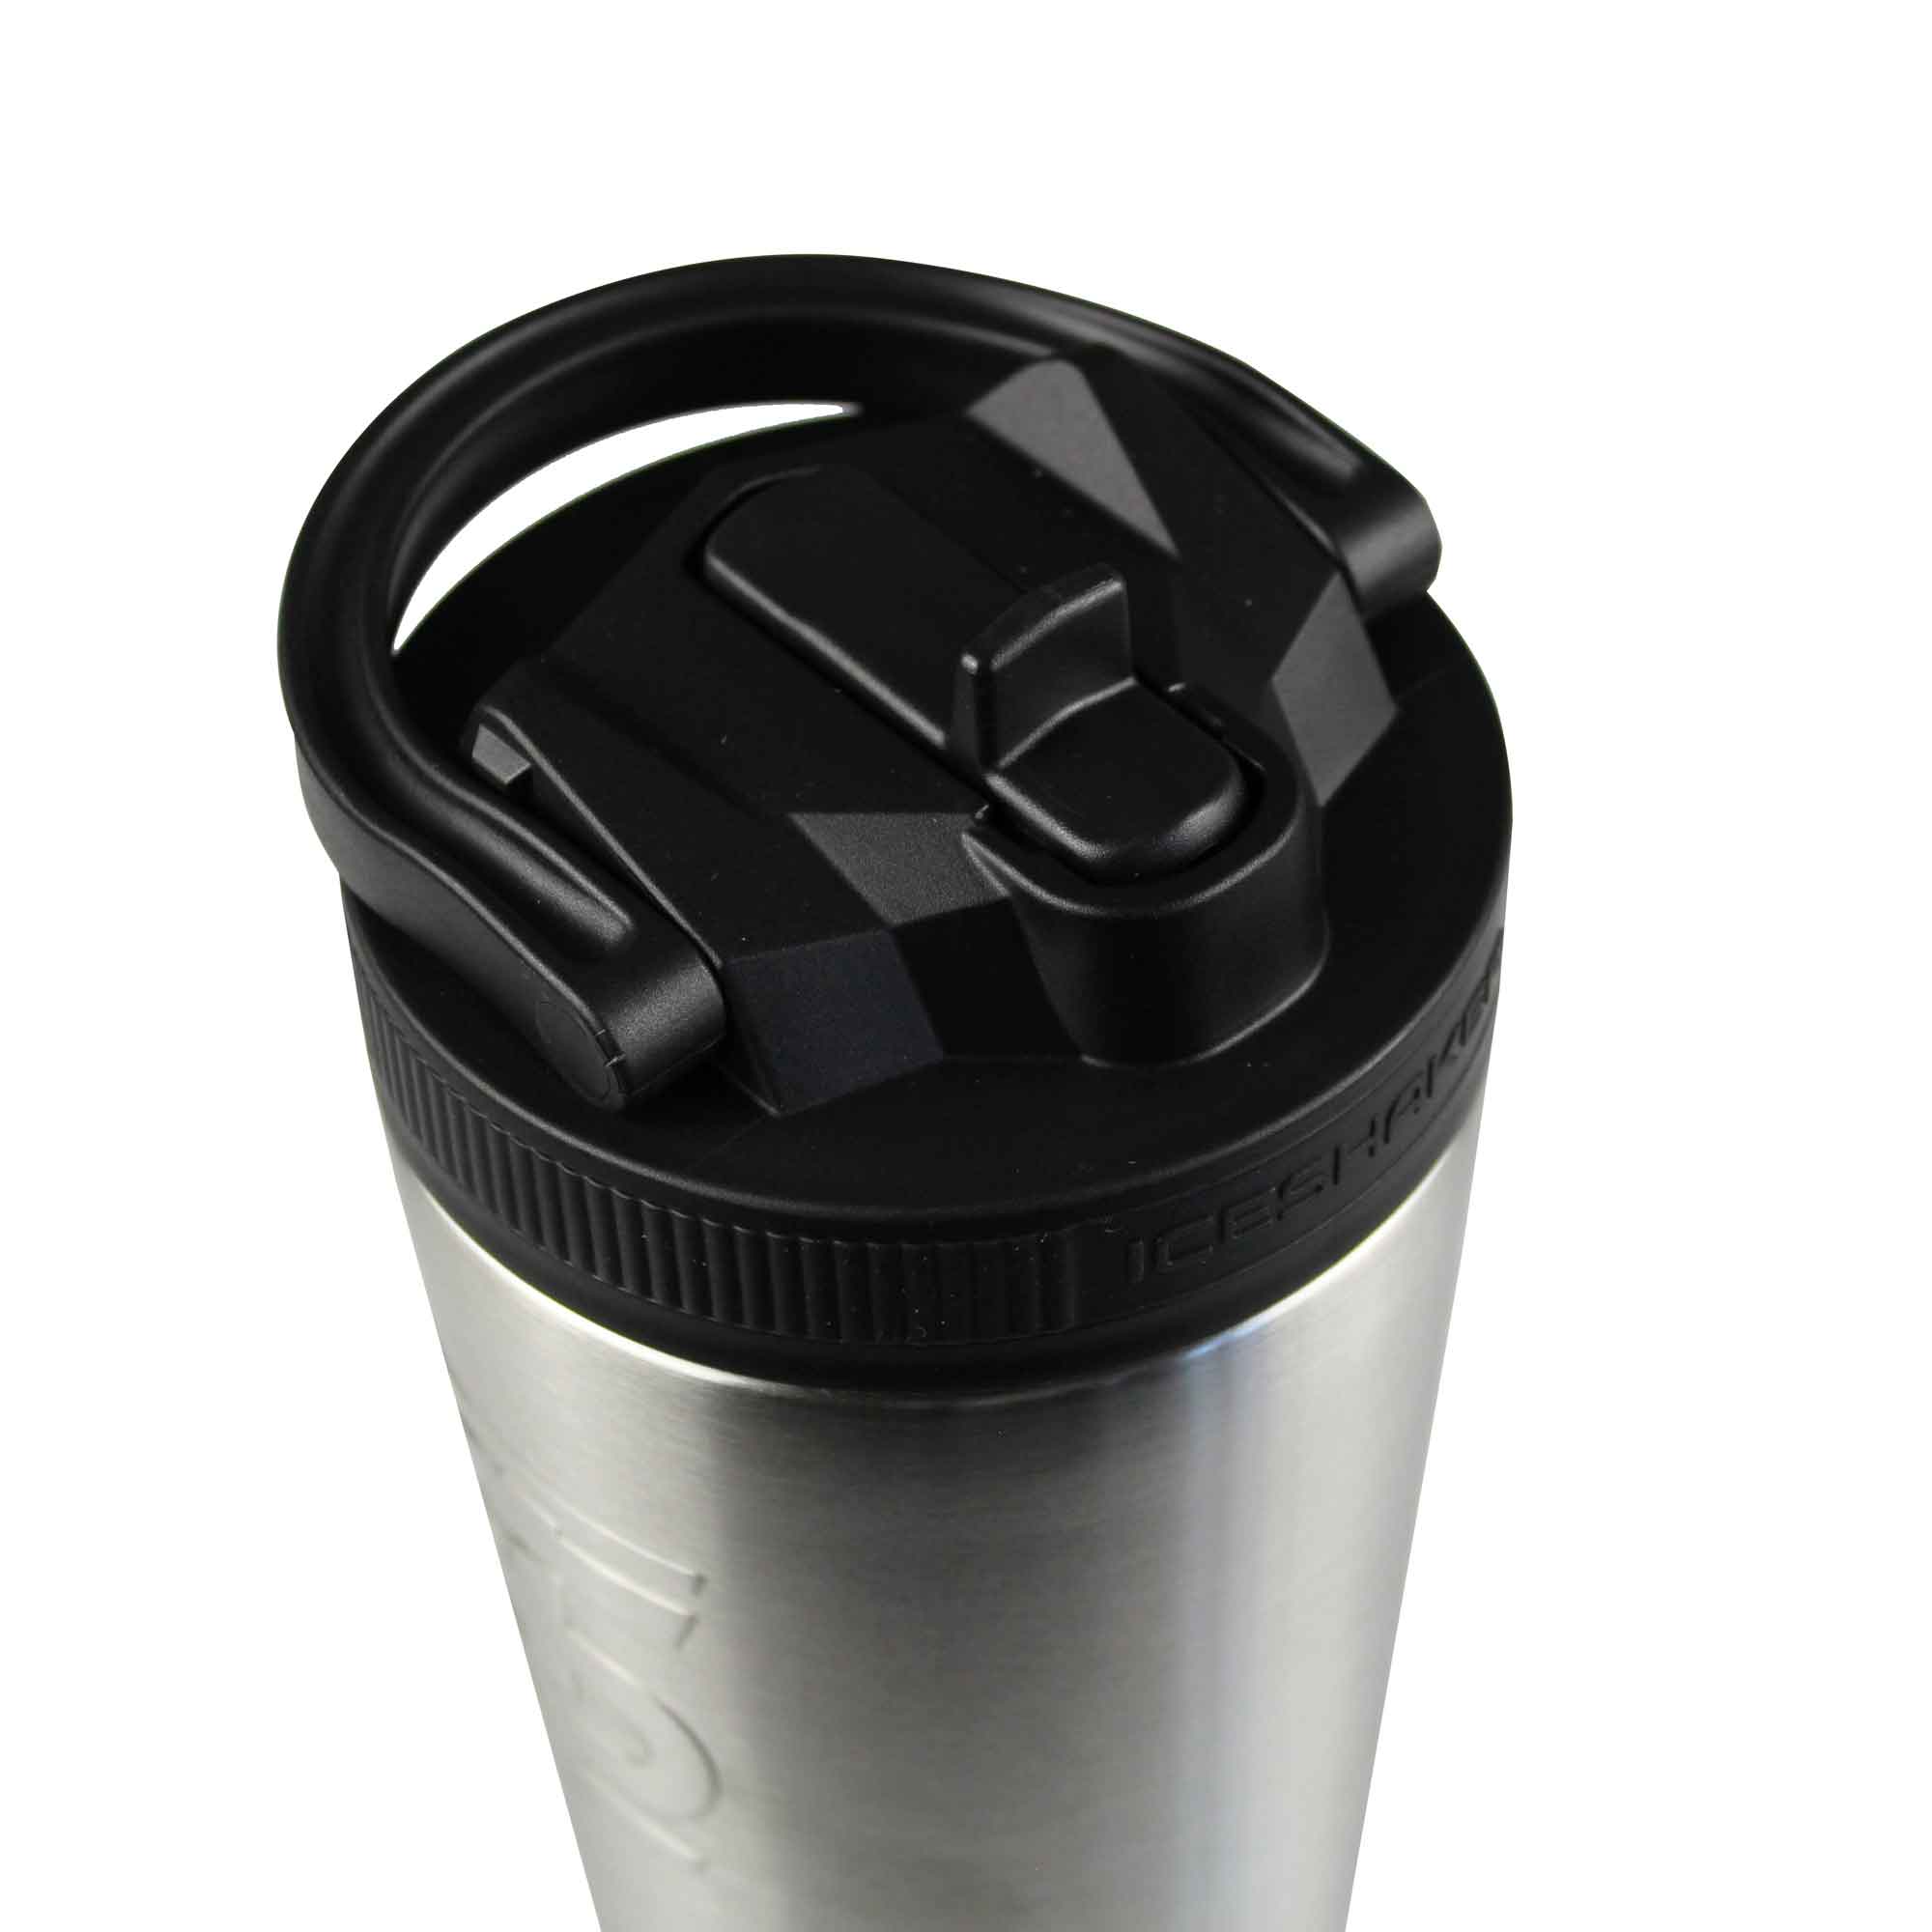 Kong Vacuum Insulated Travel Tumbler - 26 oz. - Stainless Steel